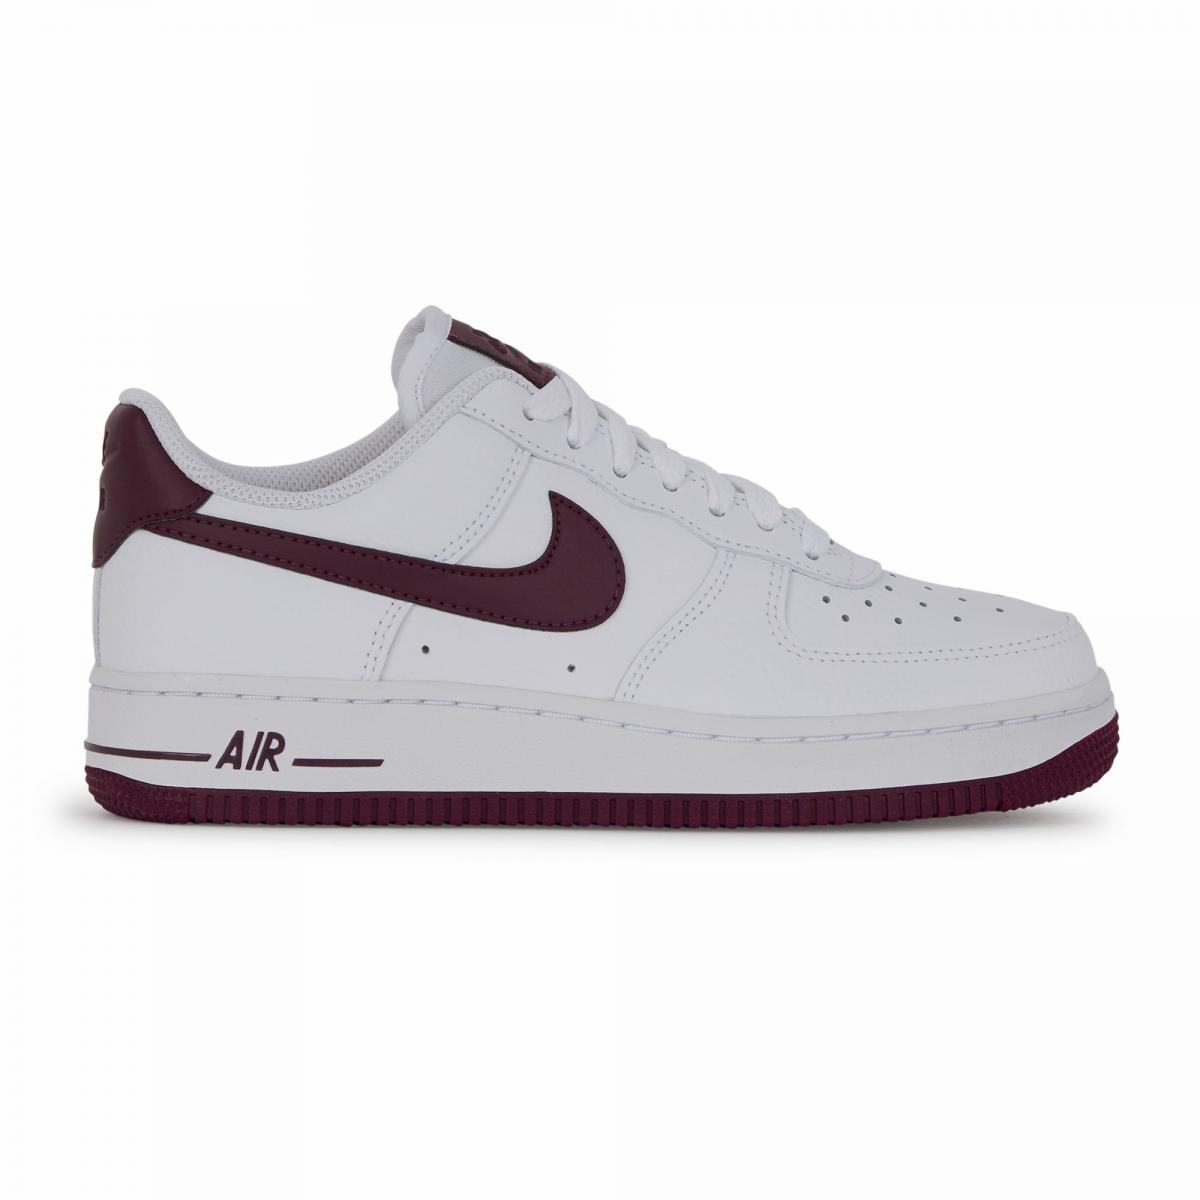 nike air force 1 basse femme,Chaussure Nike Air Force 1 Low ...